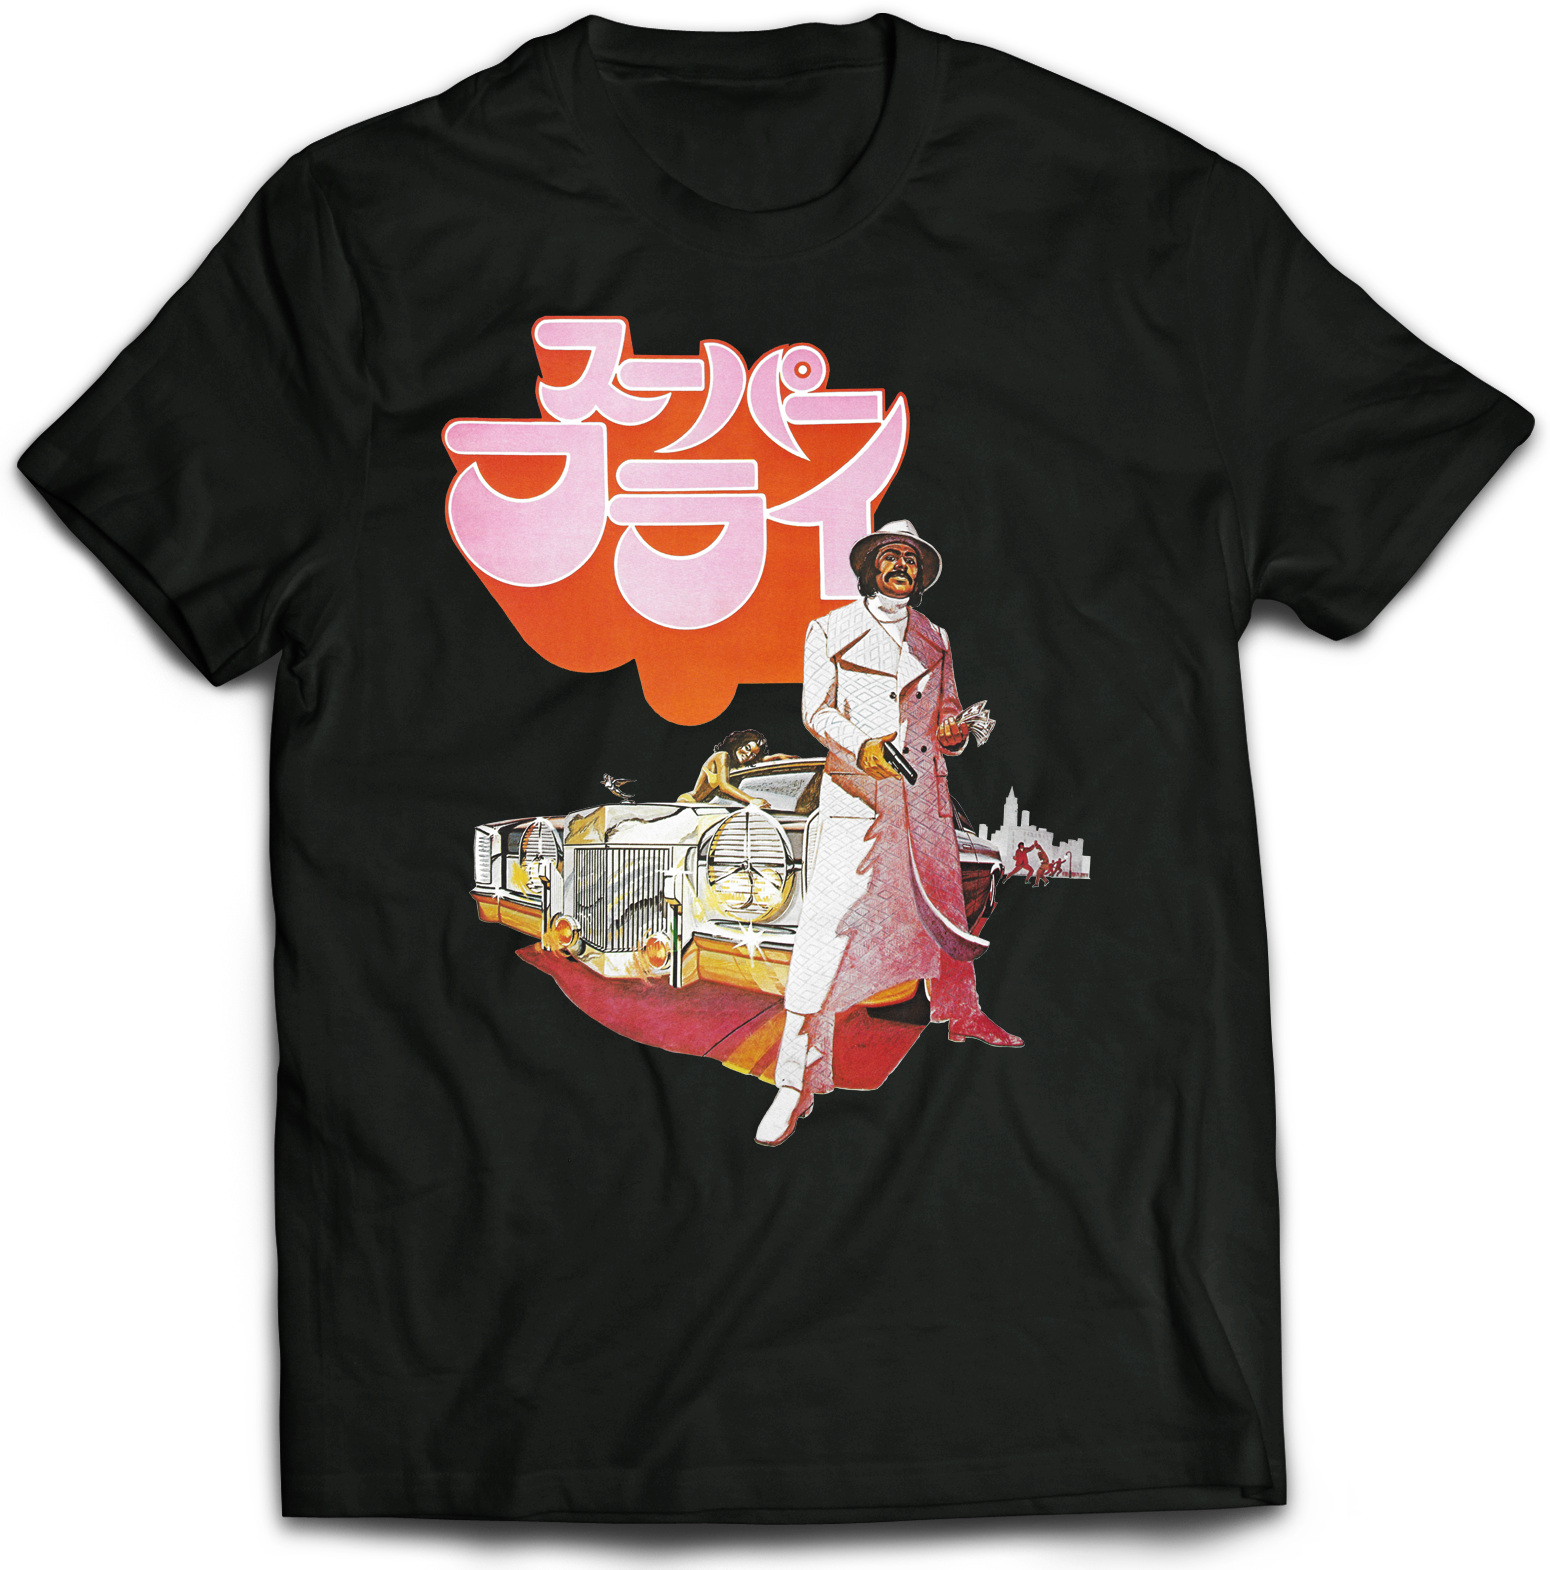 SUPER FLY : JAPANESE POSTER T-SHIRT